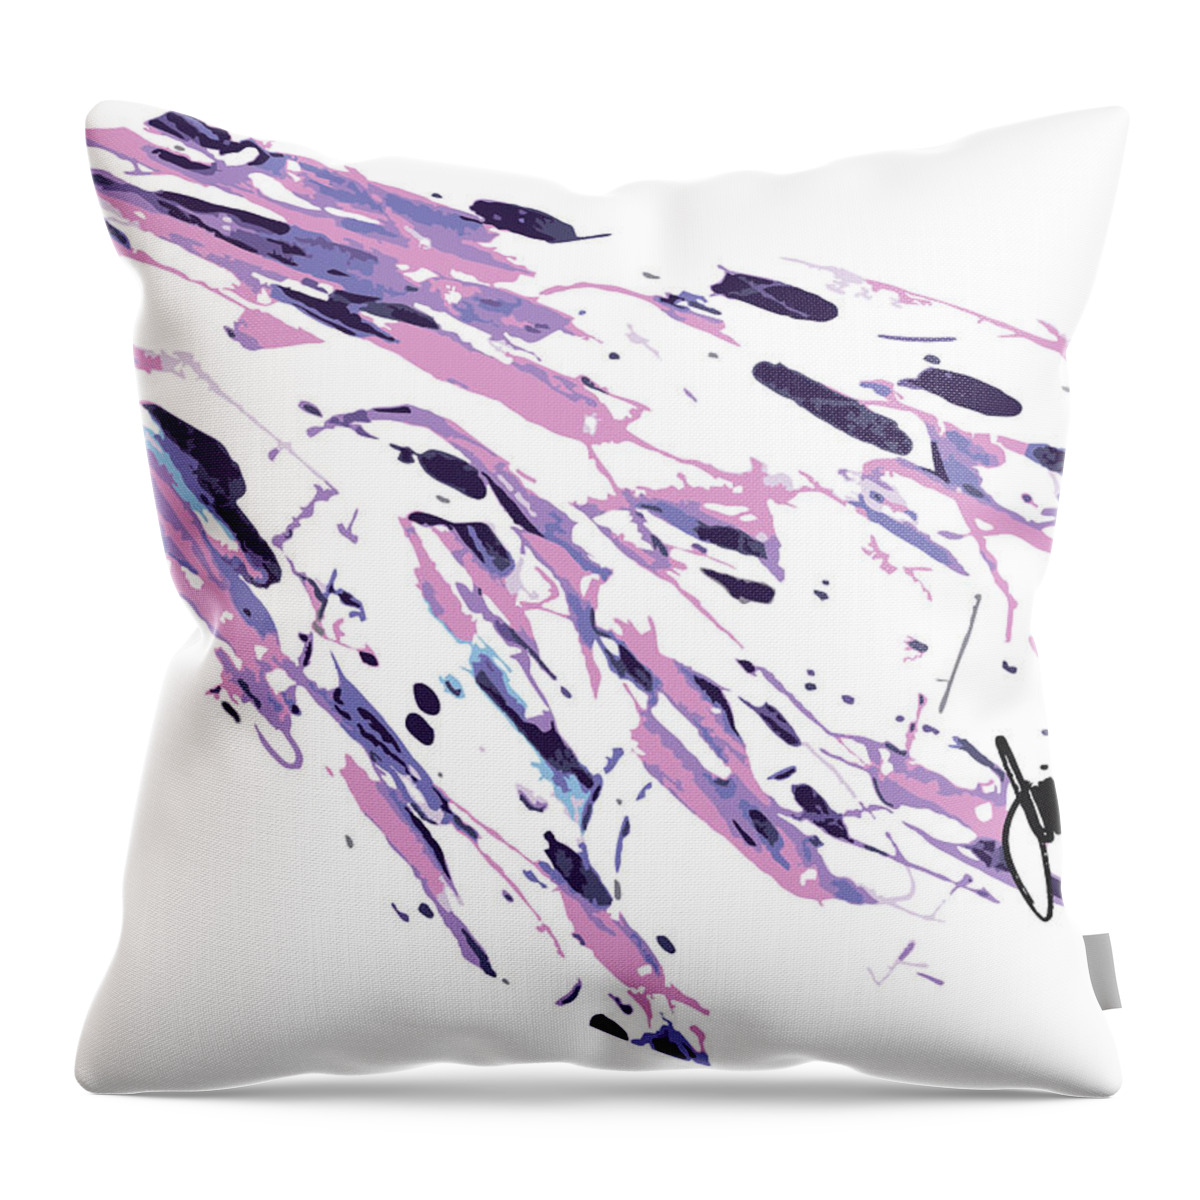  Throw Pillow featuring the digital art East #1 by Jimmy Williams